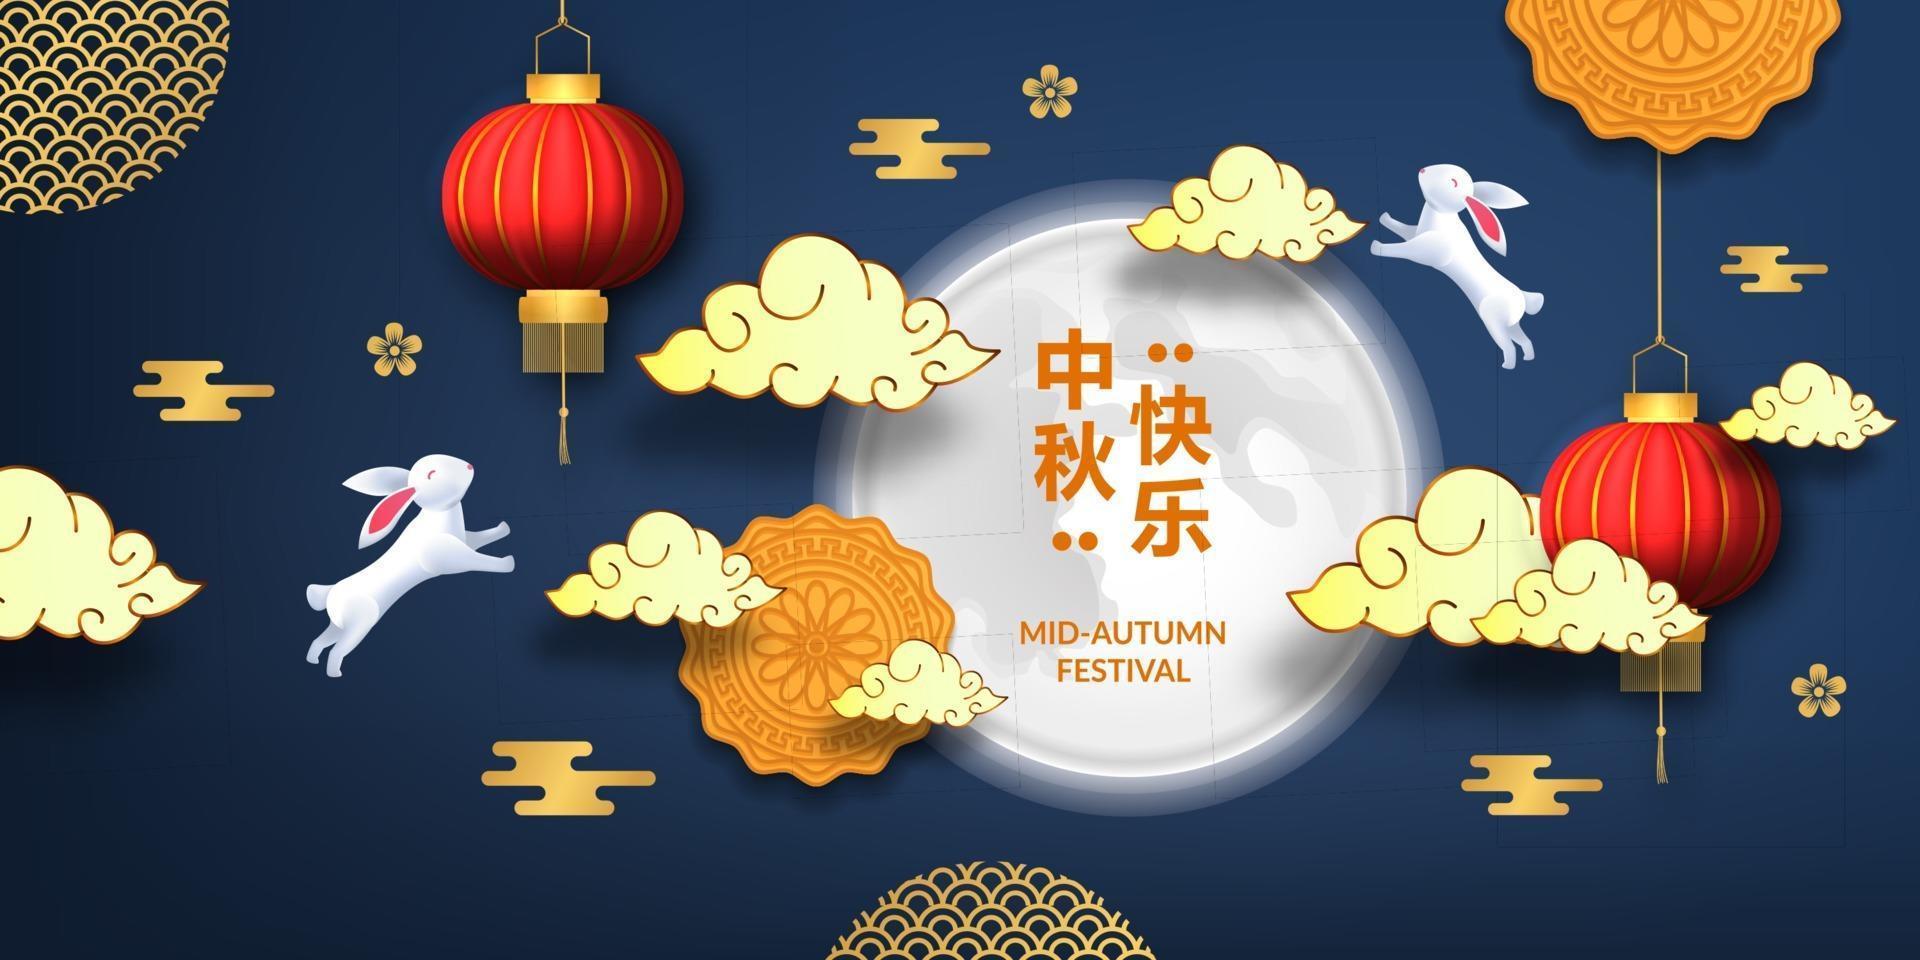 Where to celebrate MidAutumn Festival in Shanghai? Expats Holidays